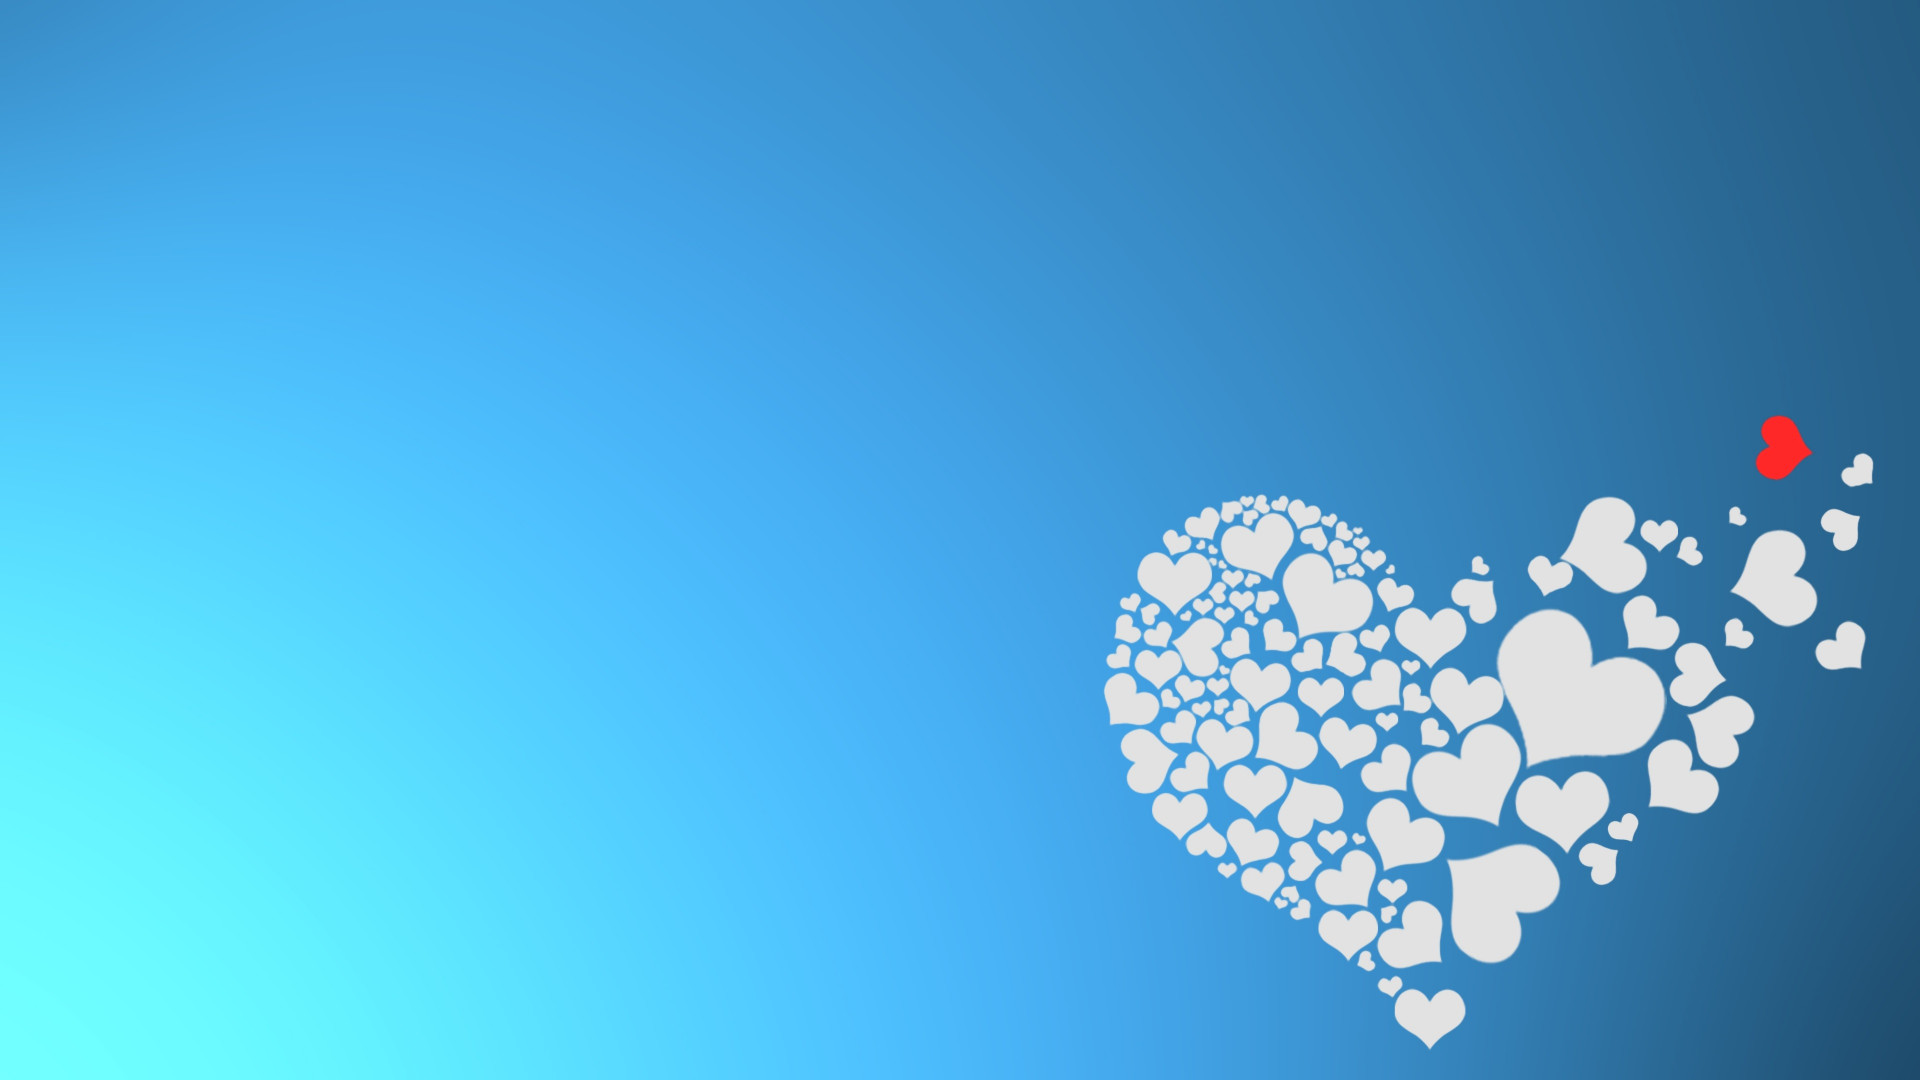 The hearts of love wallpaper 1920x1080